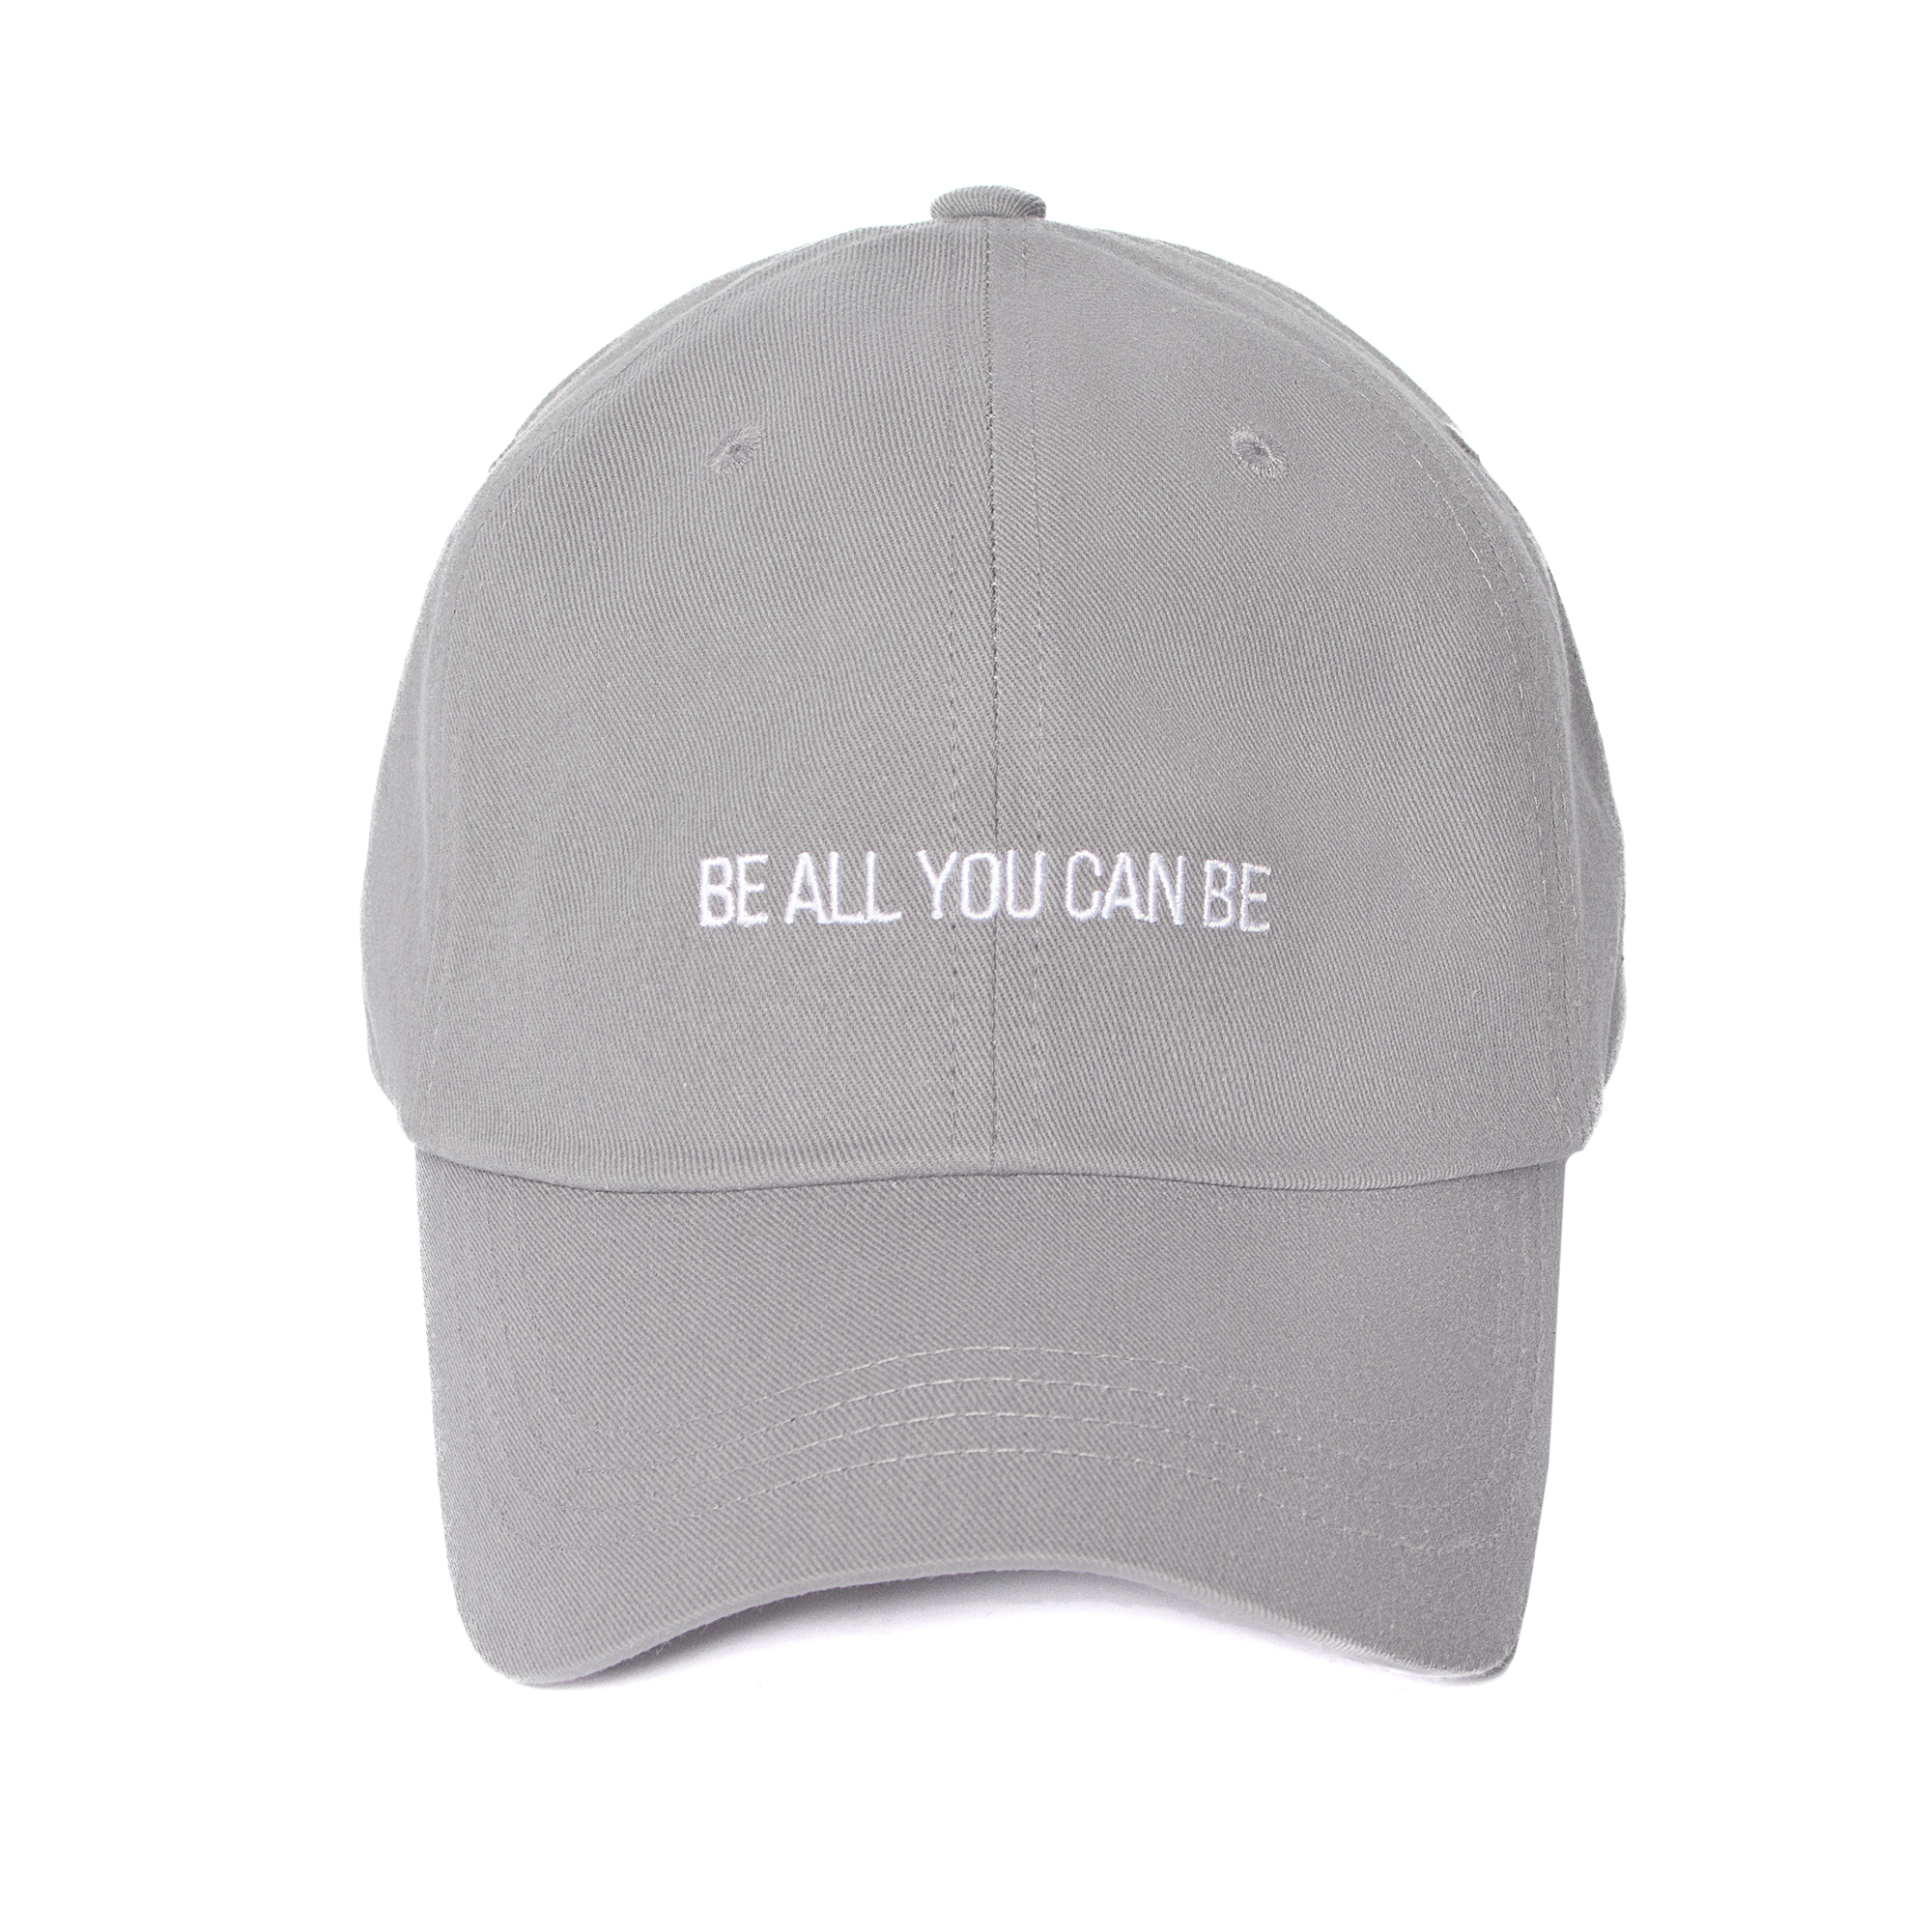 HW-BC160 : “Be All You Can Be” Ball CapㅣGrey